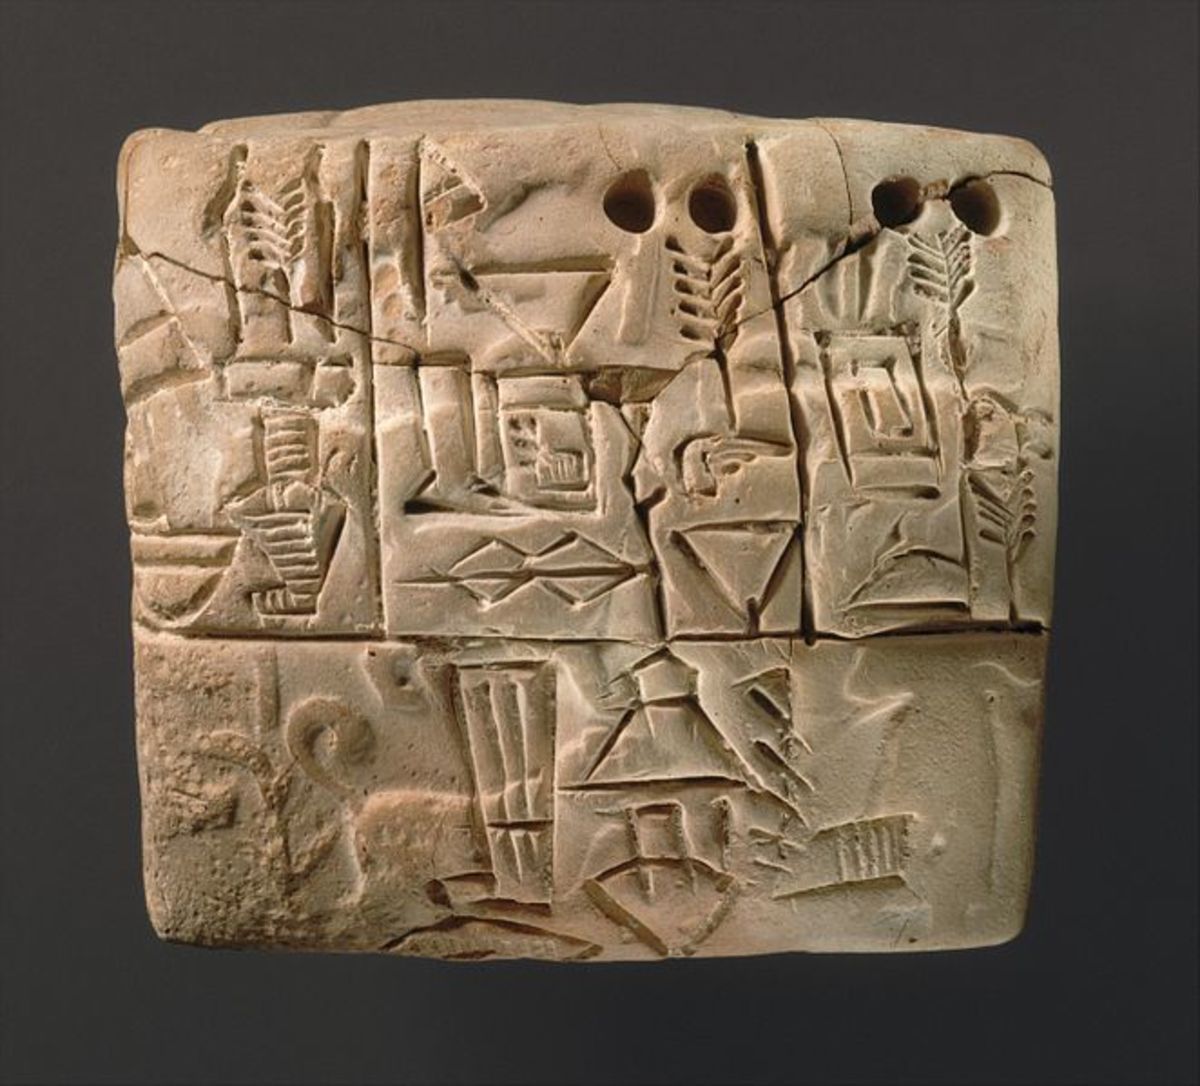 A Sumerian cuneiform tablet dated back to around 3000 BC. It is believed to be an administrative account of barley distribution.